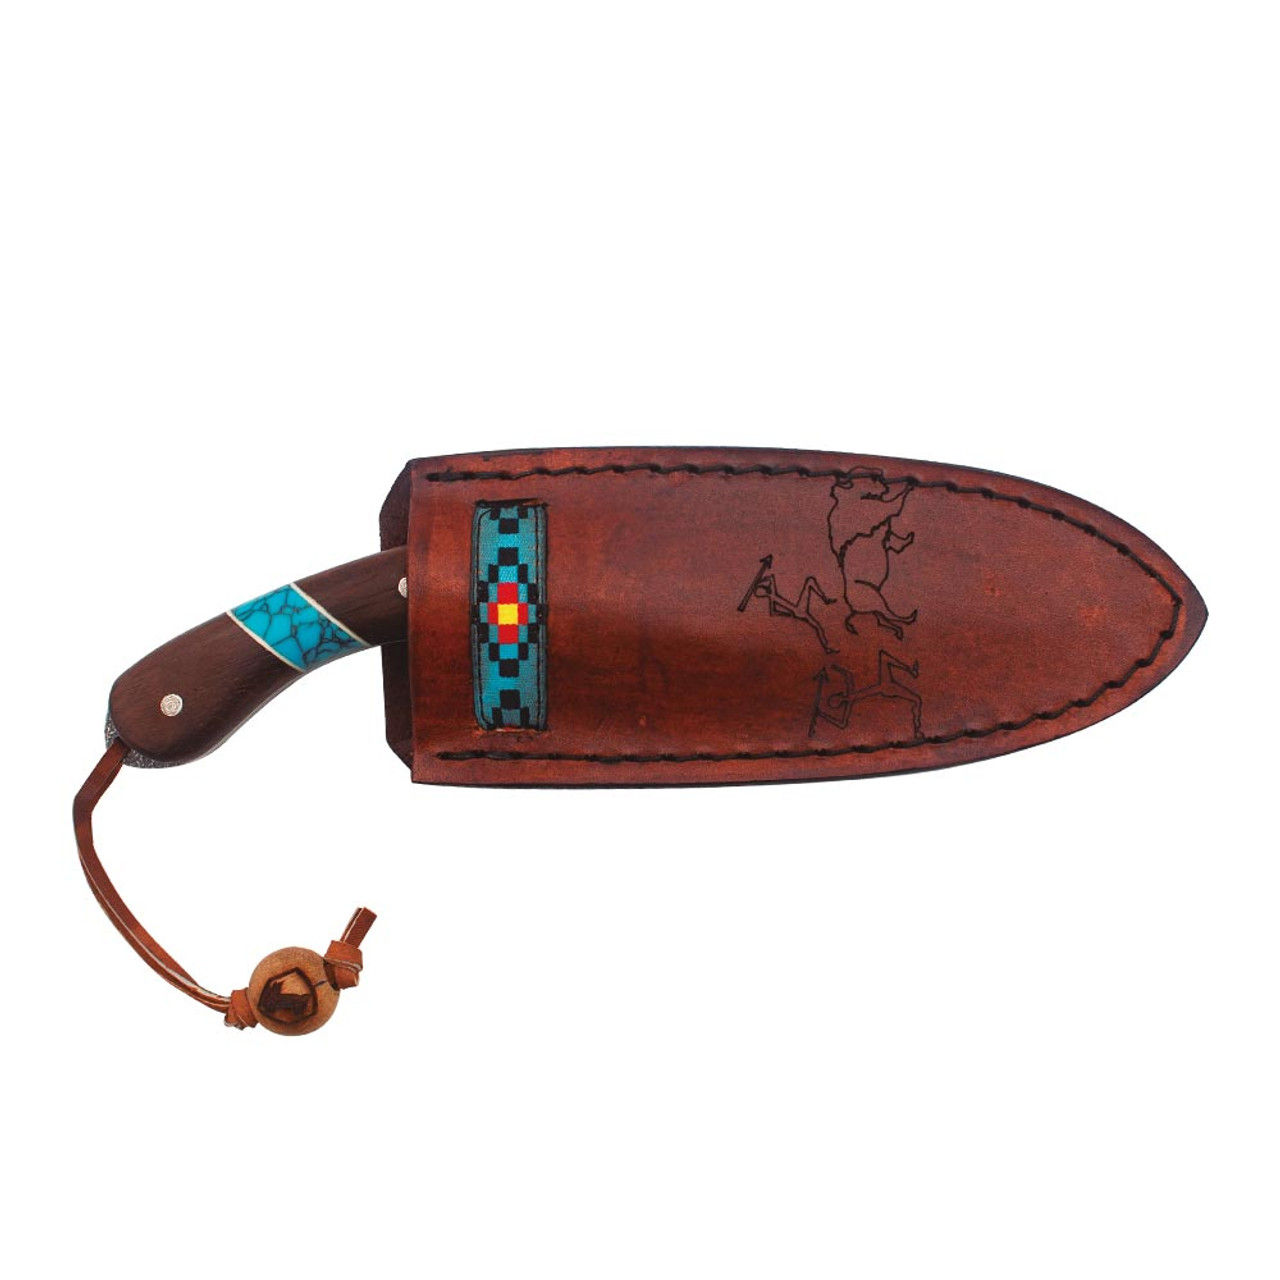 Condor Blue River Skinner (CTK112354C) 3.4" 440C Natural Drop Point Plain Blade, Walnut Wood and Turquoise Handle, Brown Leather Sheath